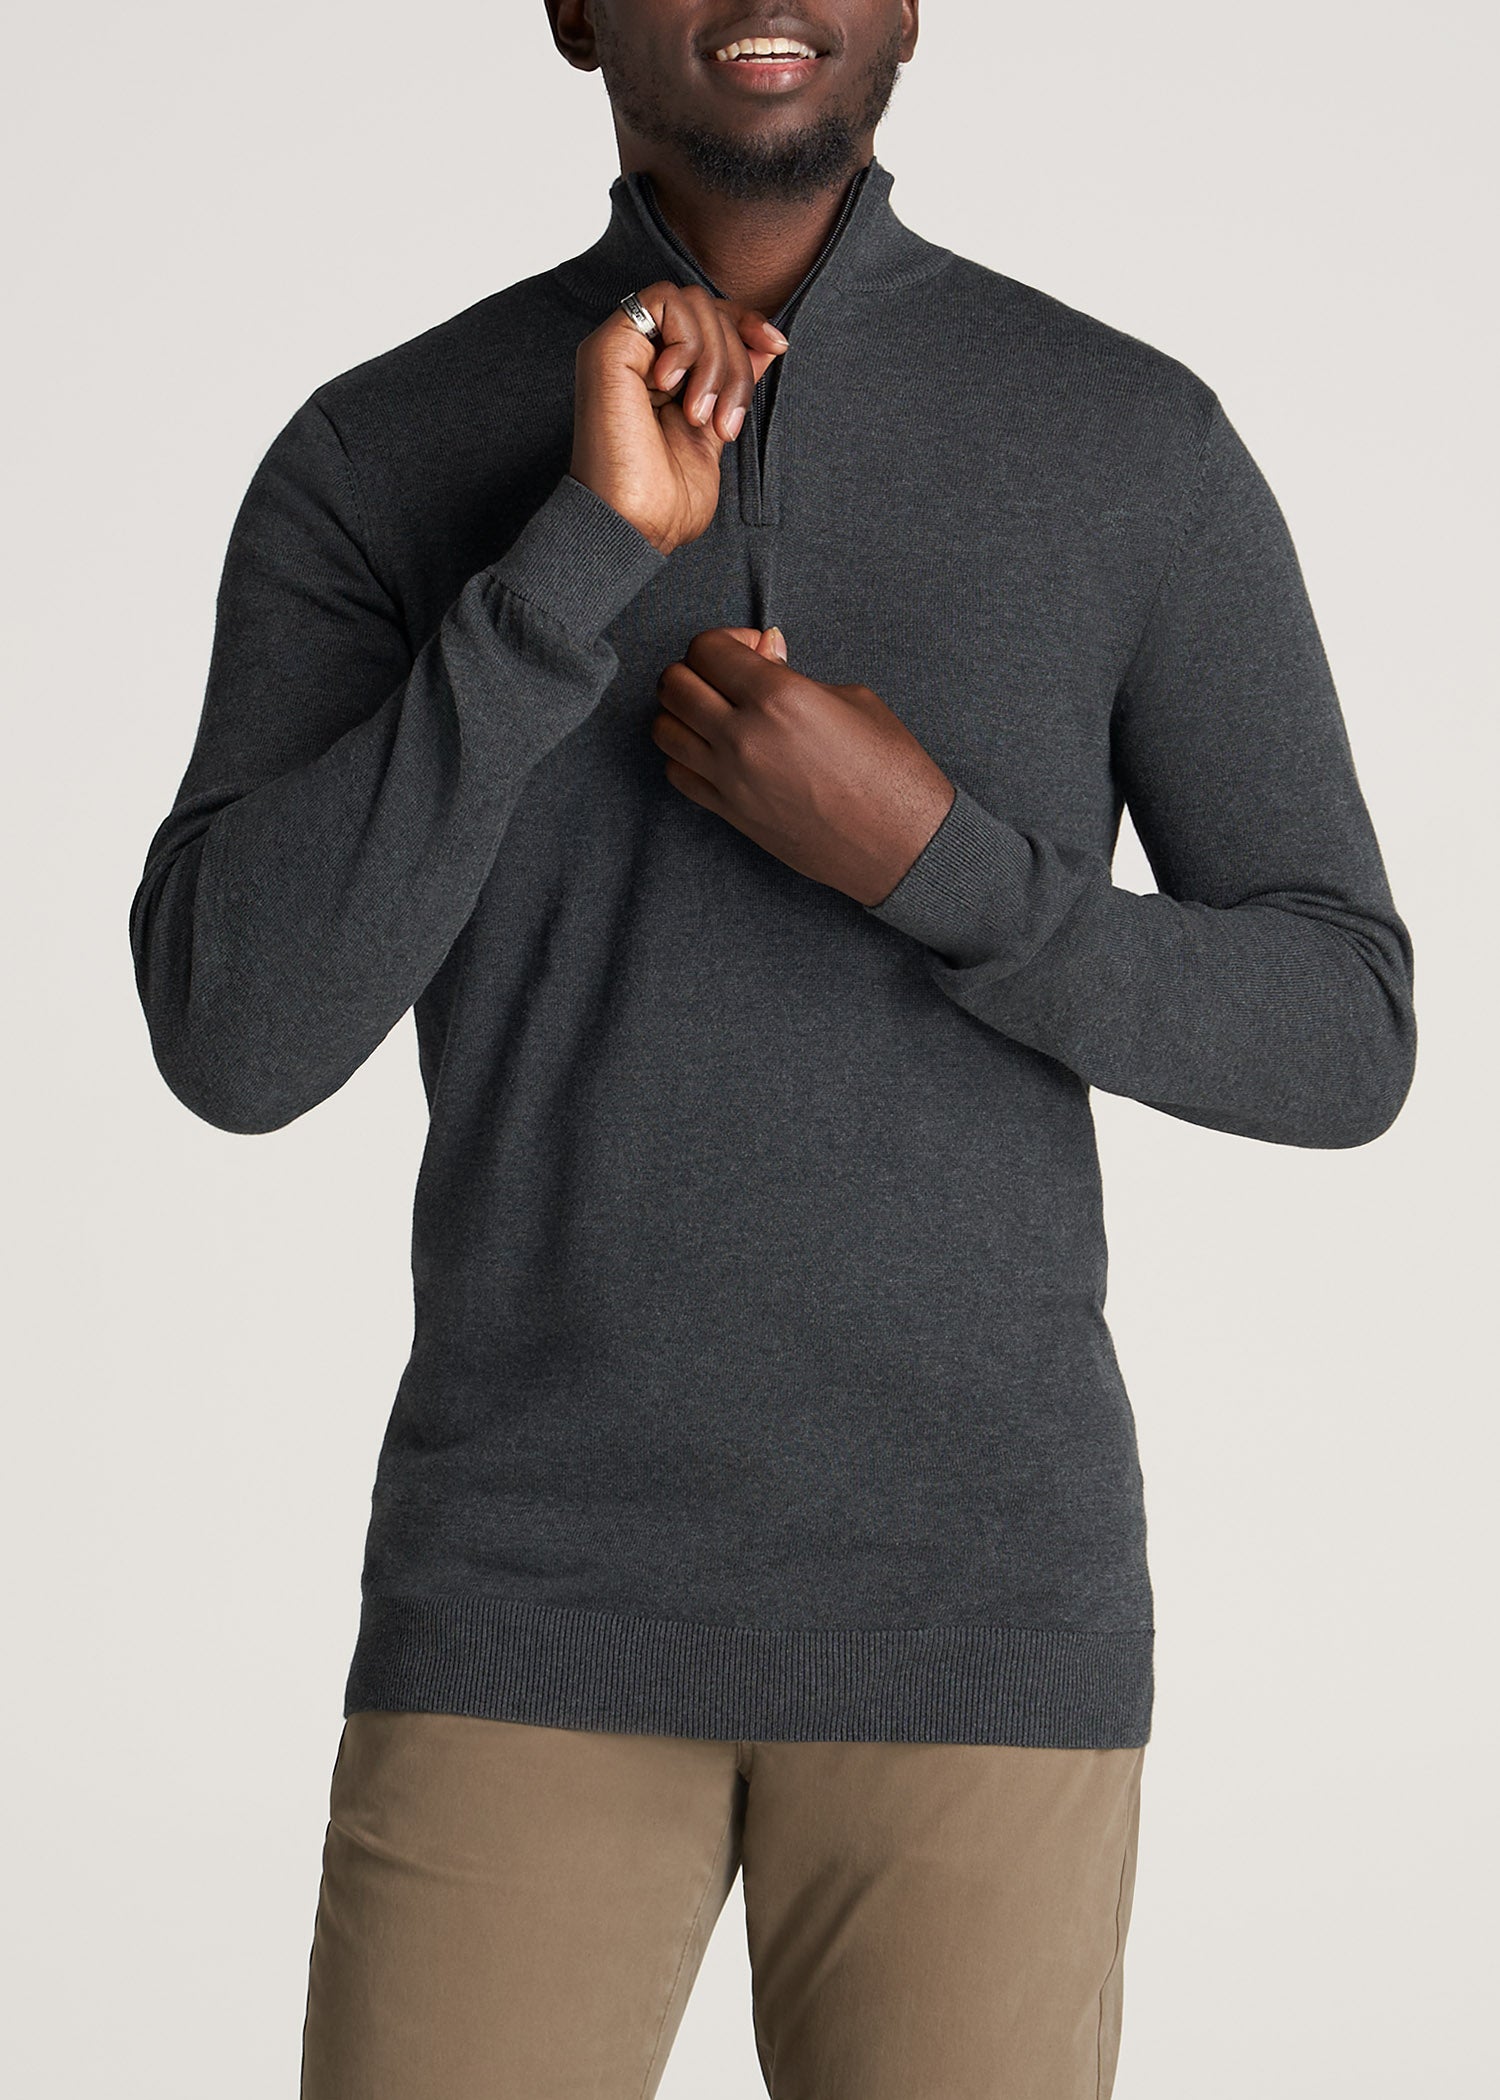 How Men Can Style Around Solid Quarter-Zip Sweater - Family Britches